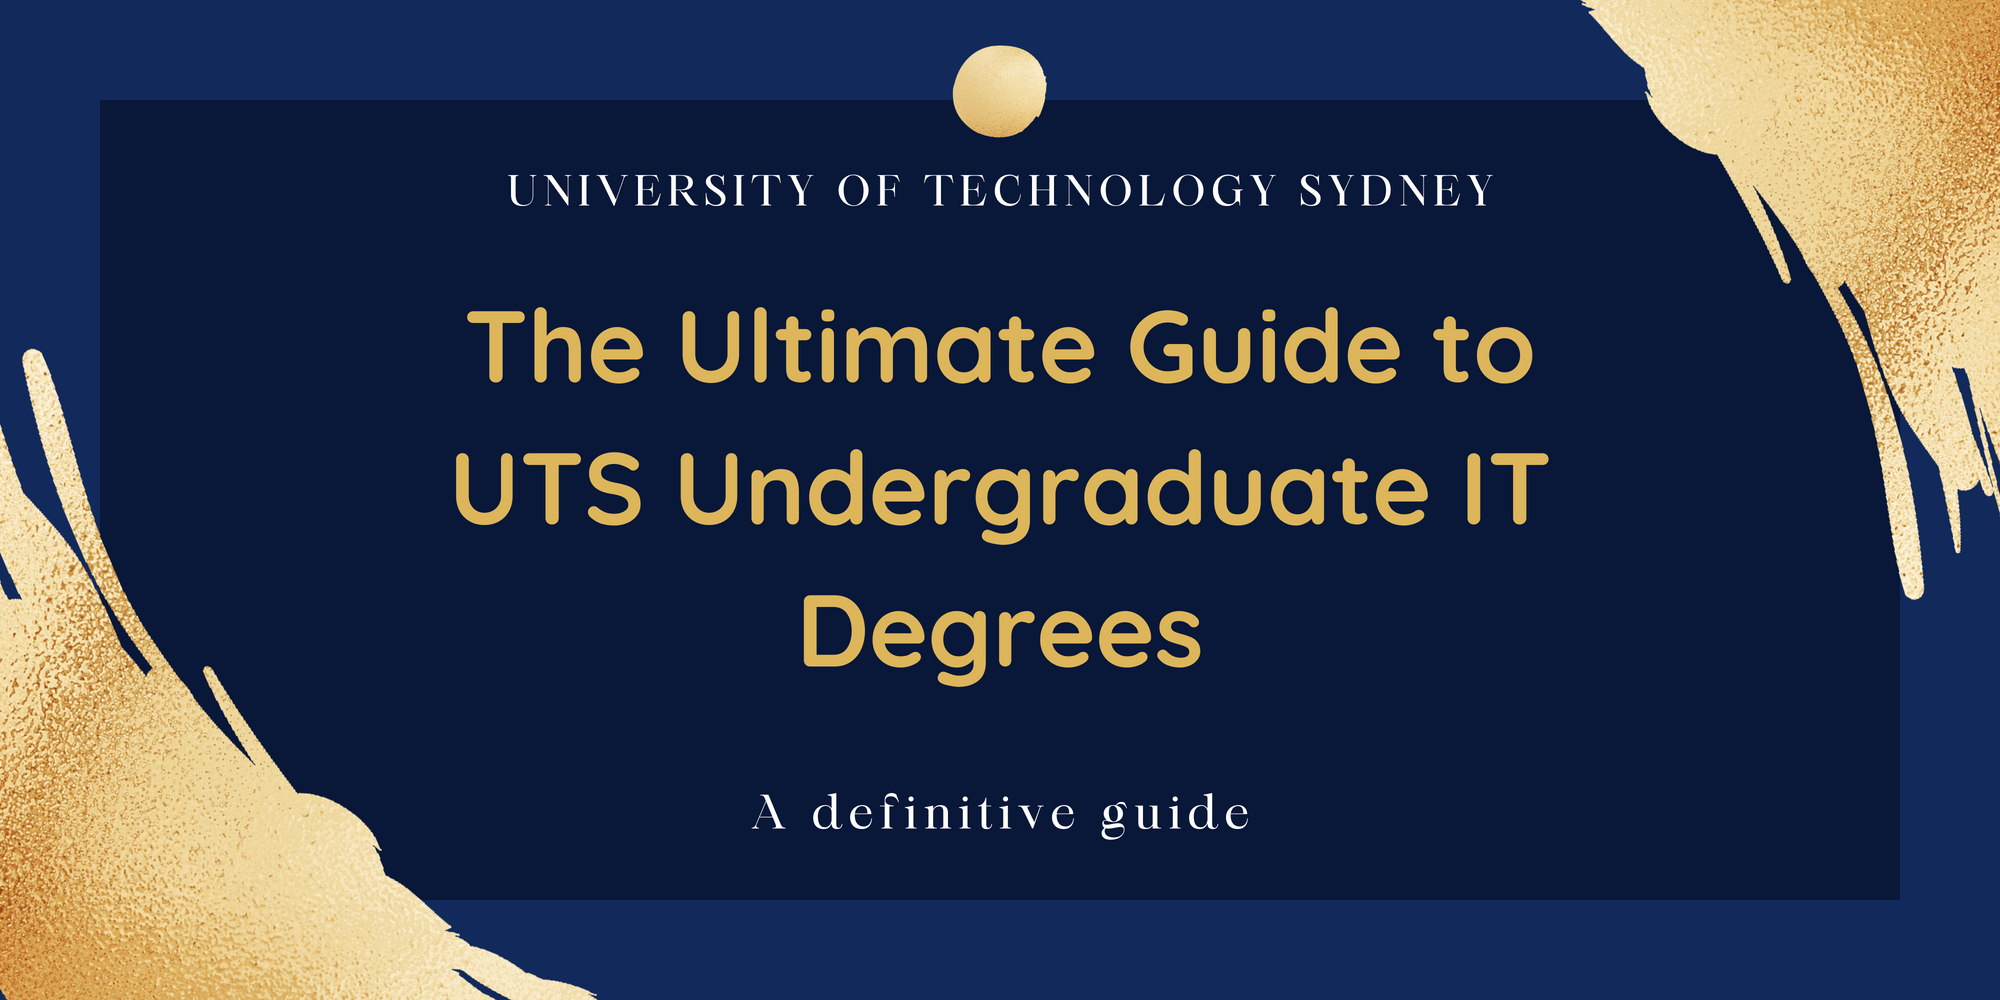 The Ultimate Guide to UTS Undergraduate IT Degrees